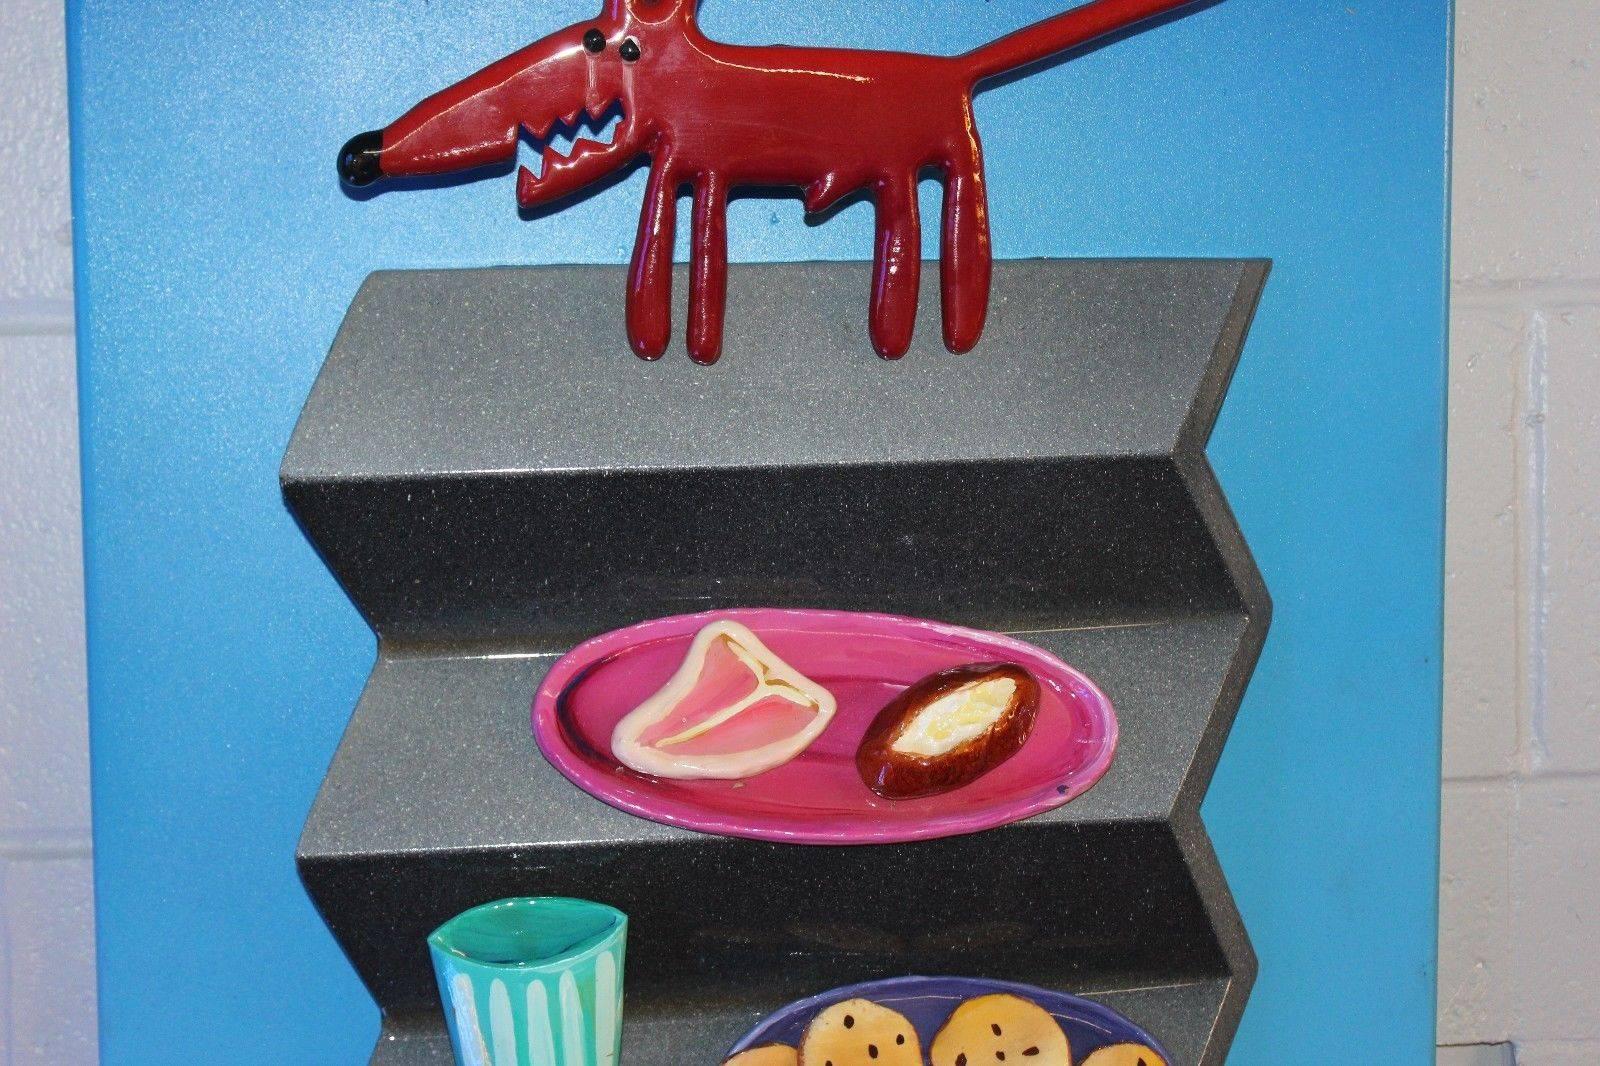 American 1980s-1990s Hotdog Artwork Mixed-Media on Wood by Roark Gourley For Sale